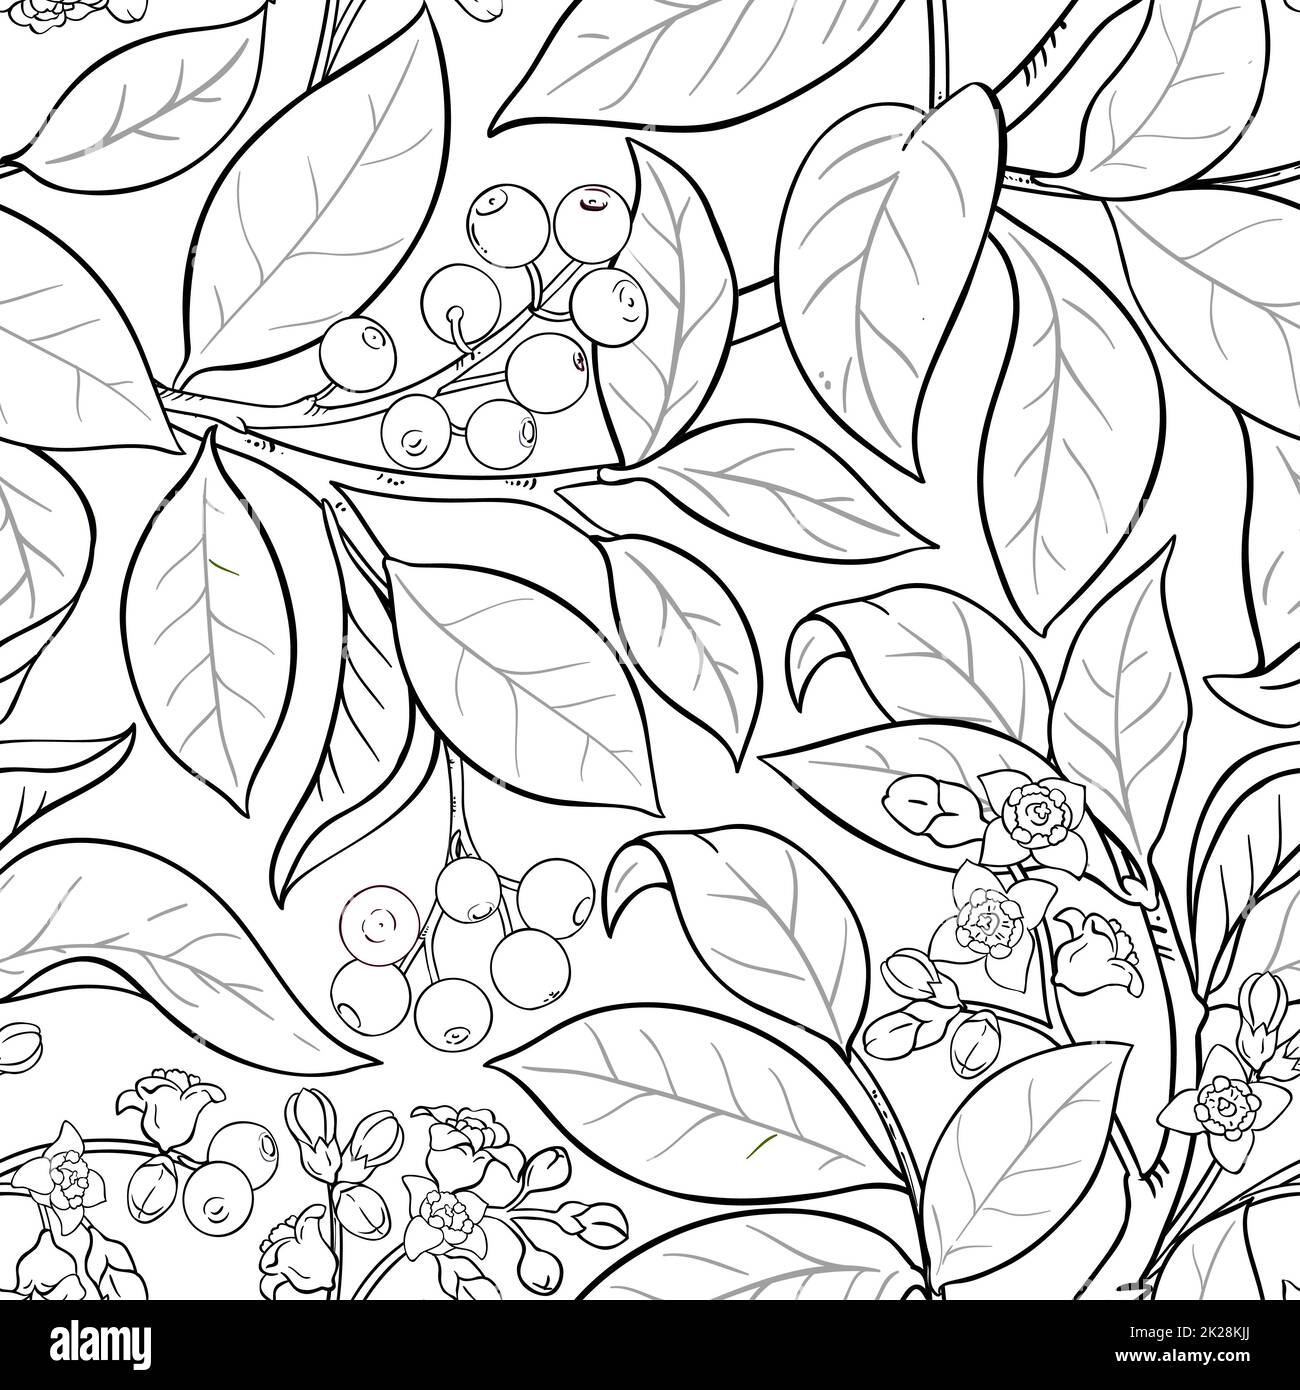 sandalwood branches vector pattern Stock Photo